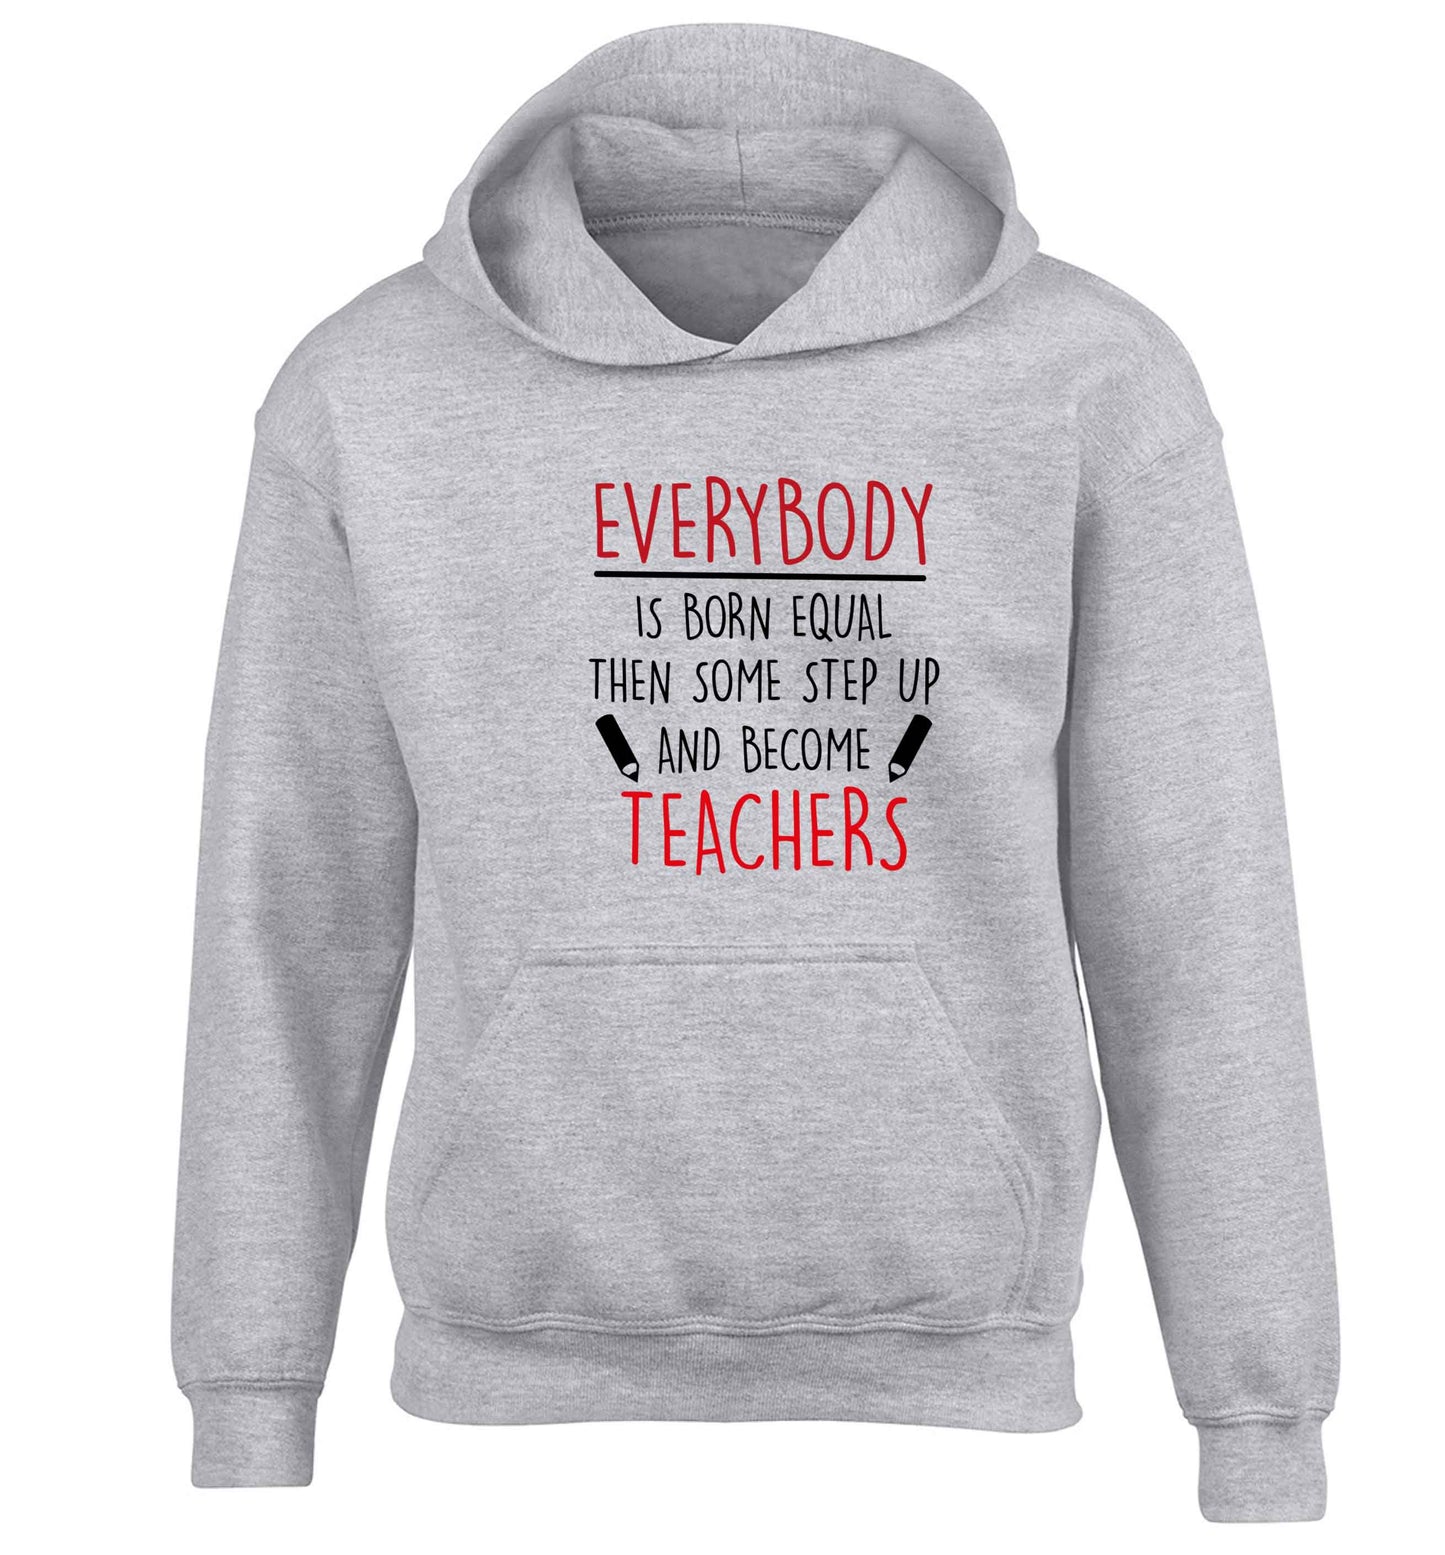 Everybody is born equal then some step up and become teachers children's grey hoodie 12-13 Years